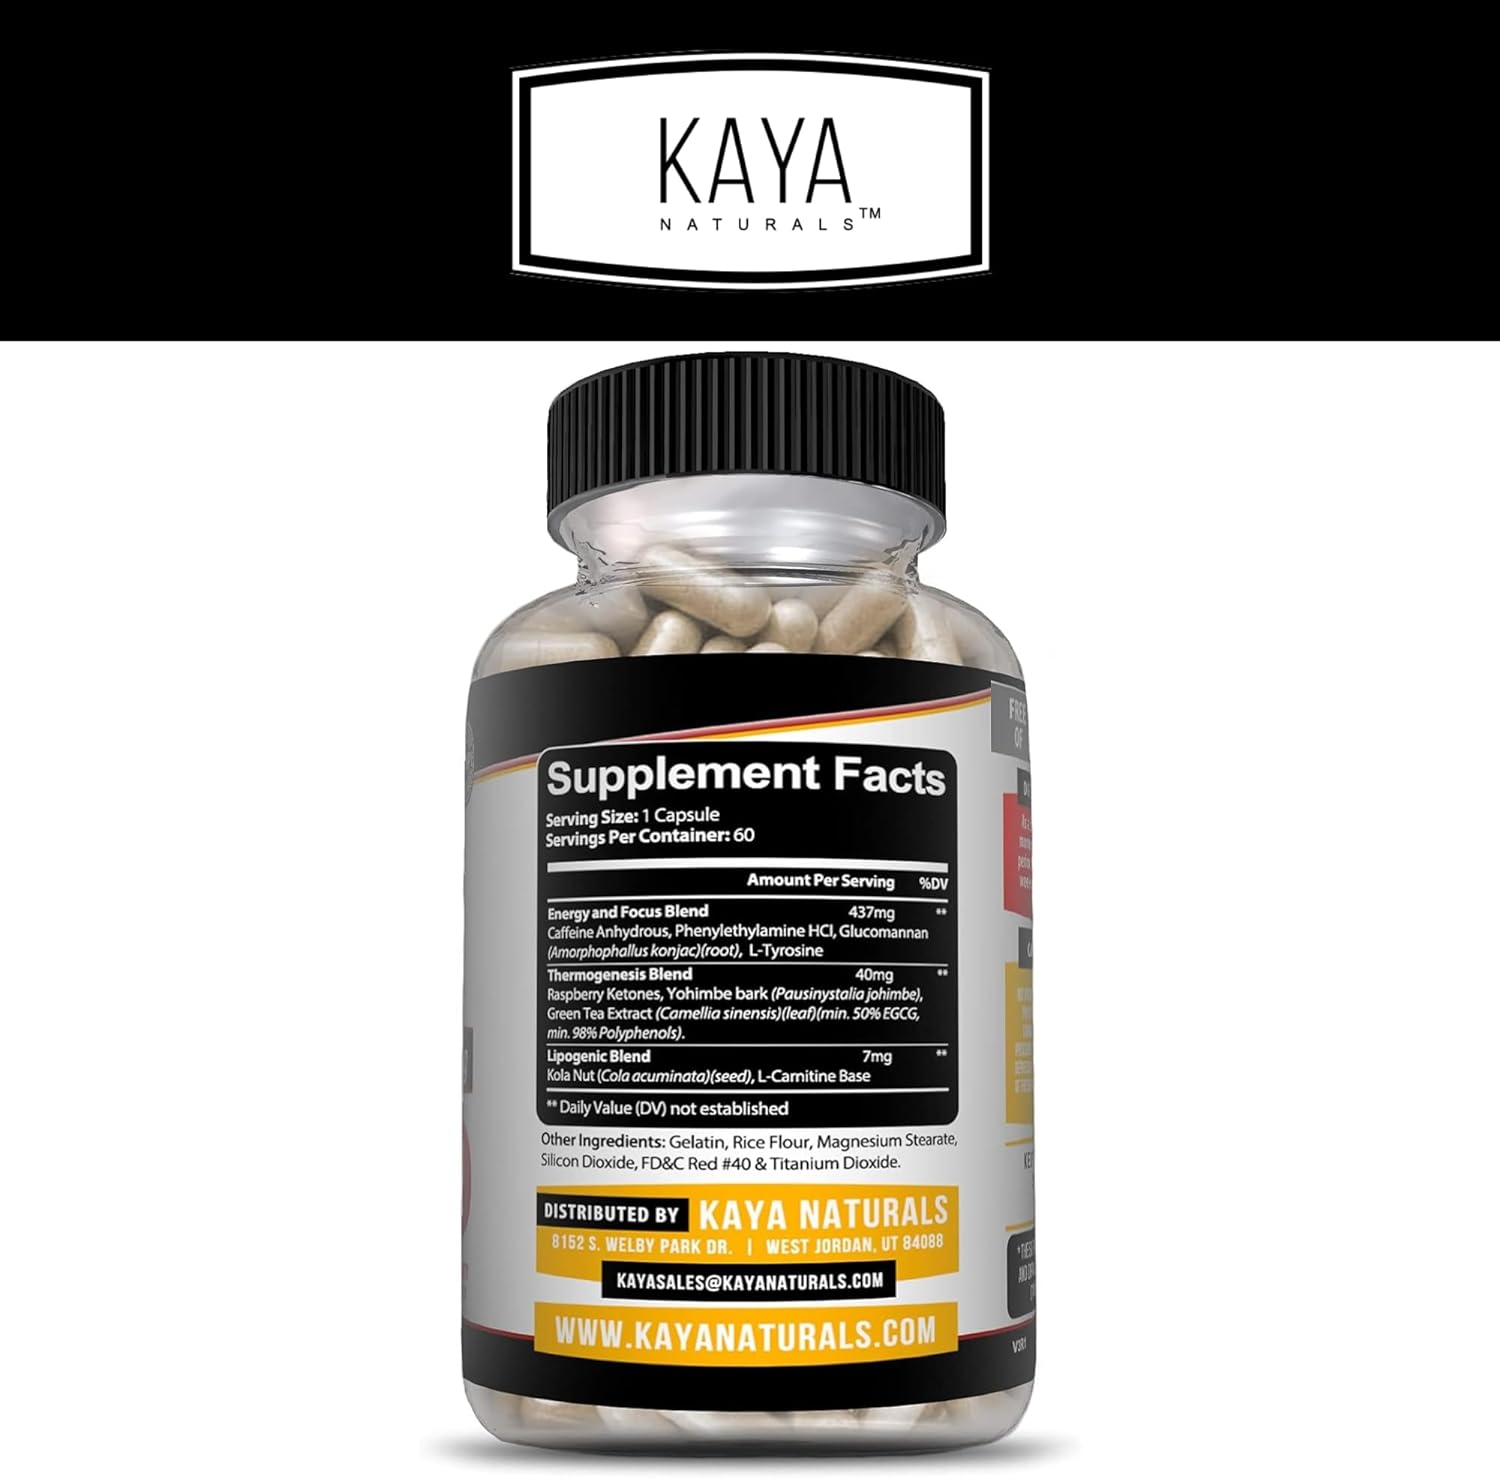 Kaya Naturals Oxy Burn - Weight Loss Pills for Women  Men - Appetite Suppressant Supplement - Supreme Fat Burner - Powerful Thermogenic Diet Pills - Natural Energy Boost - 60 Count